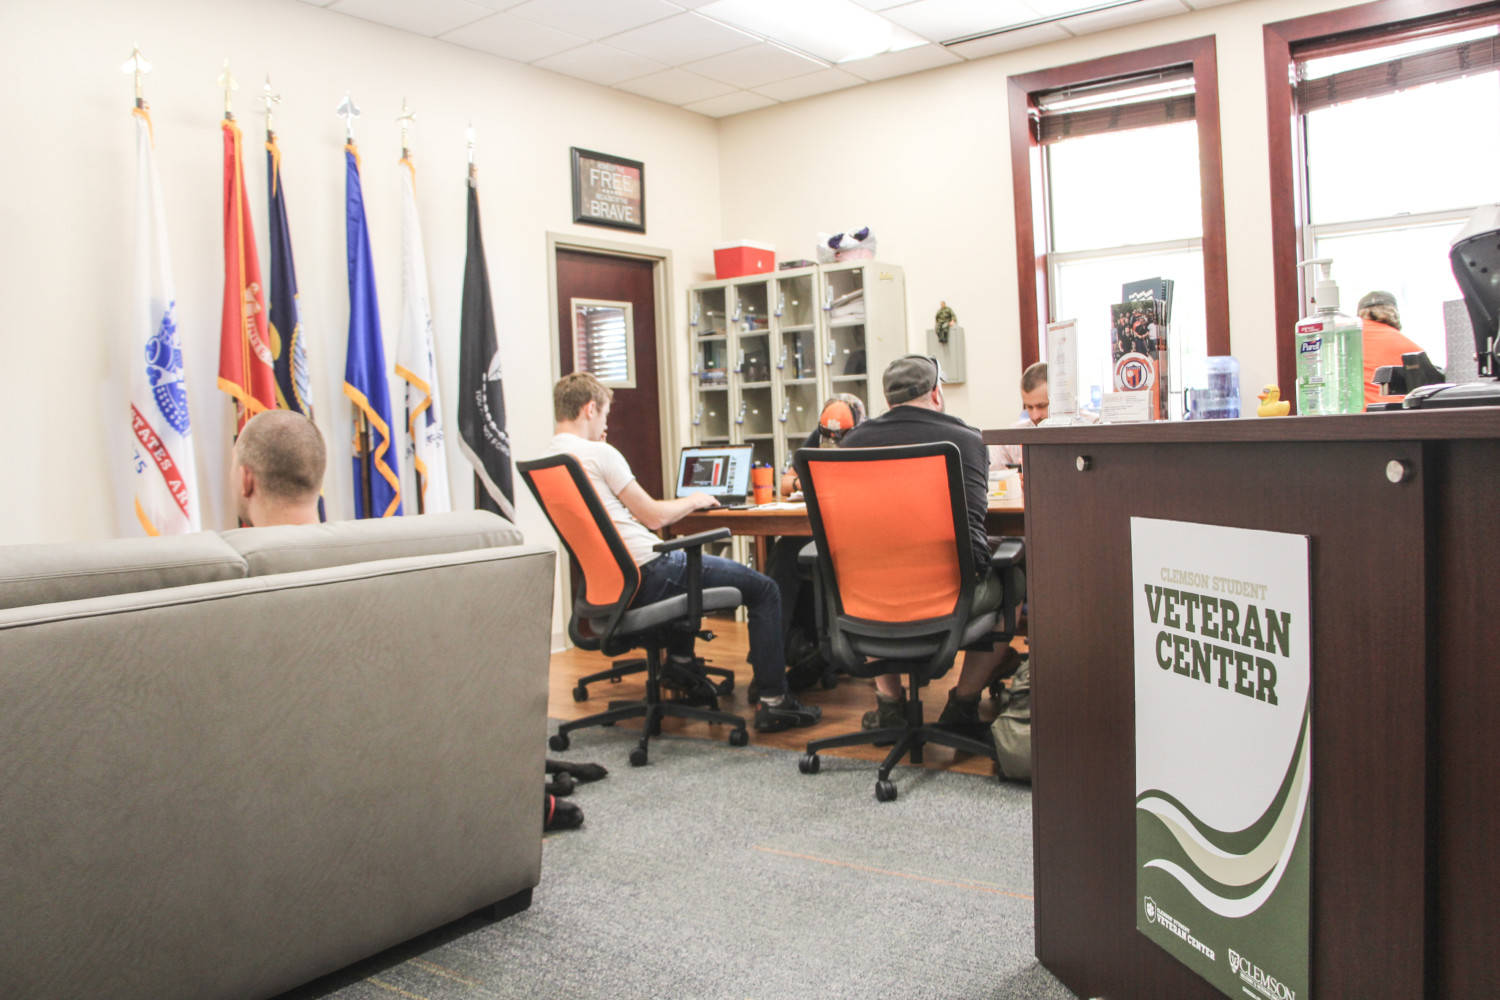 The lounge area of the new Student Veteran Center located in Vickery Hall.